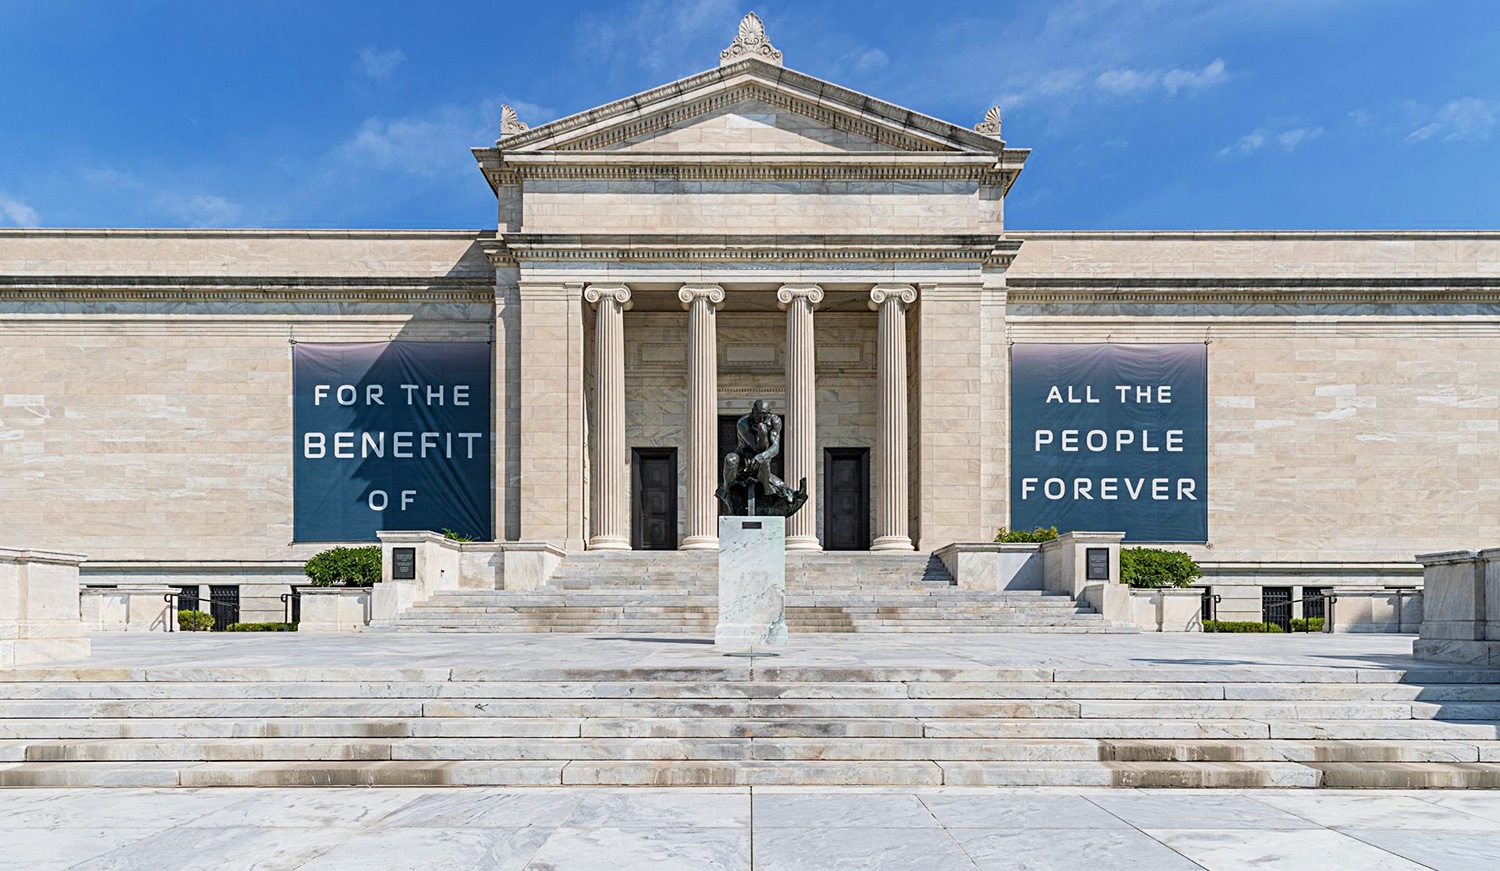 horizontal photo of the Cleveland Museum of Art with banners on the walls with the text For the Benefit of all the people forever